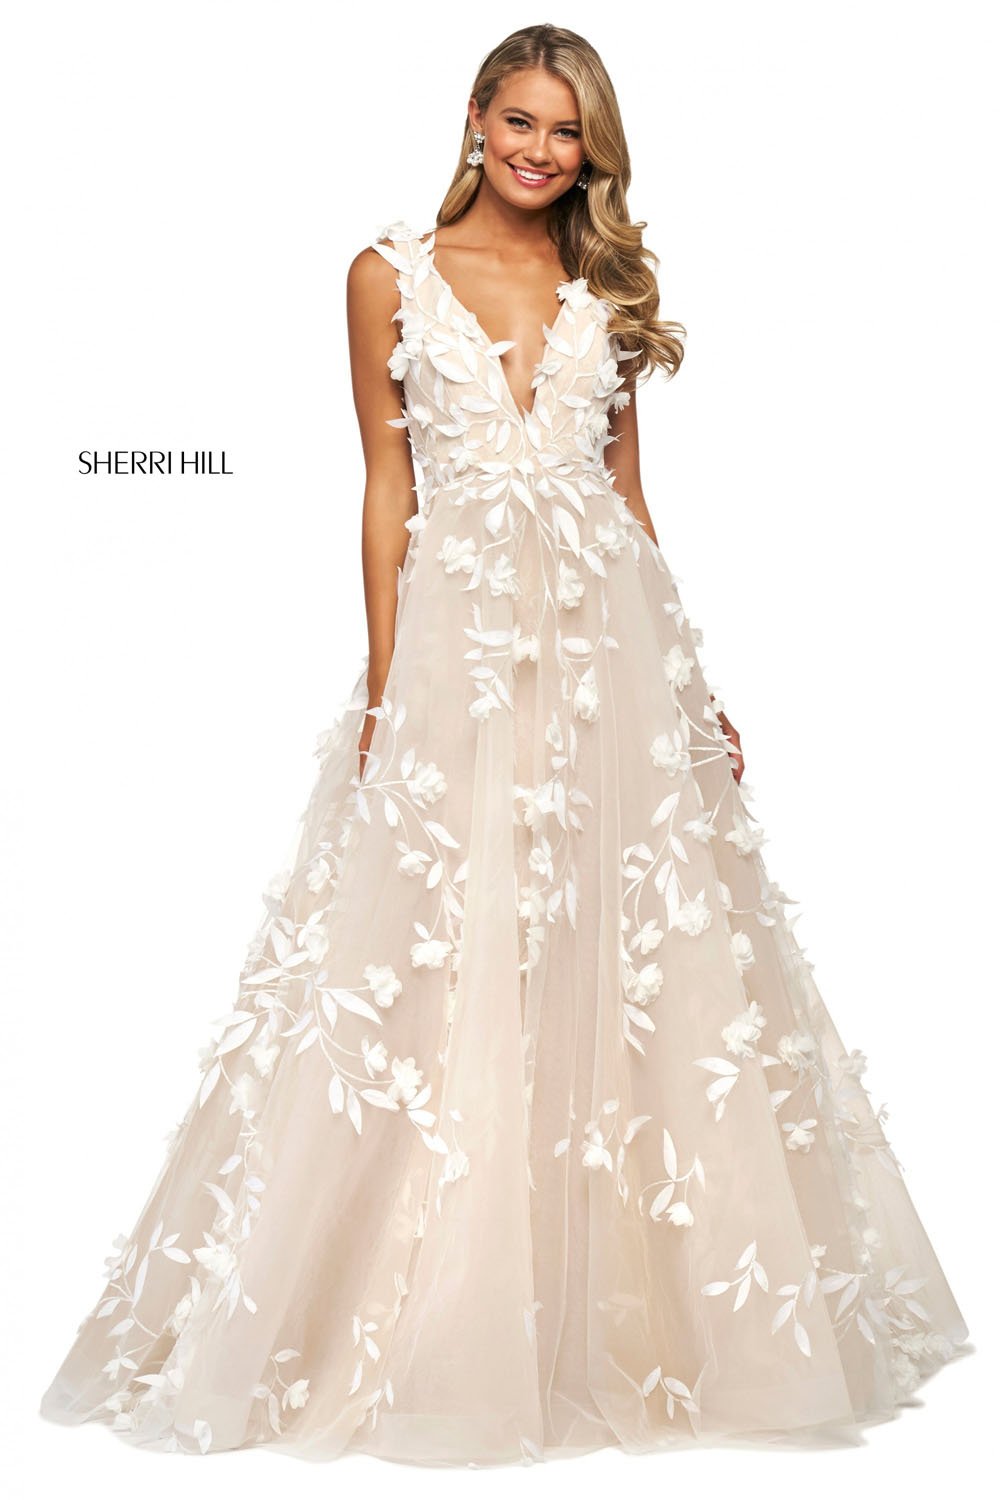 Sherri Hill 53770 dress images in these colors: Ivory Nude.